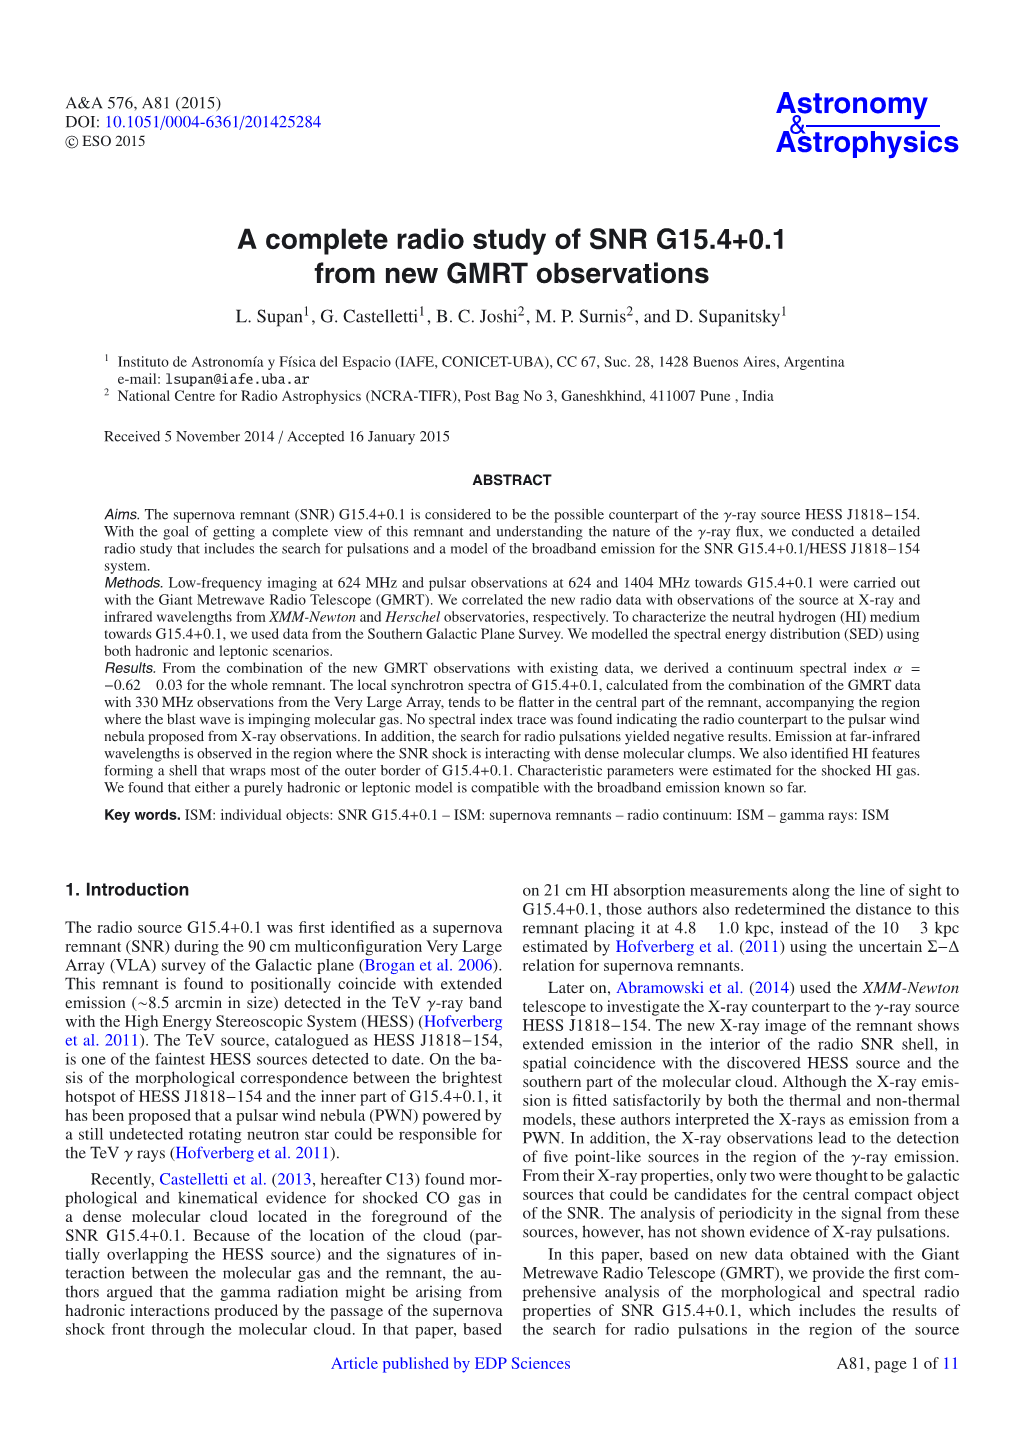 A Complete Radio Study of SNR G15.4+0.1 from New GMRT Observations